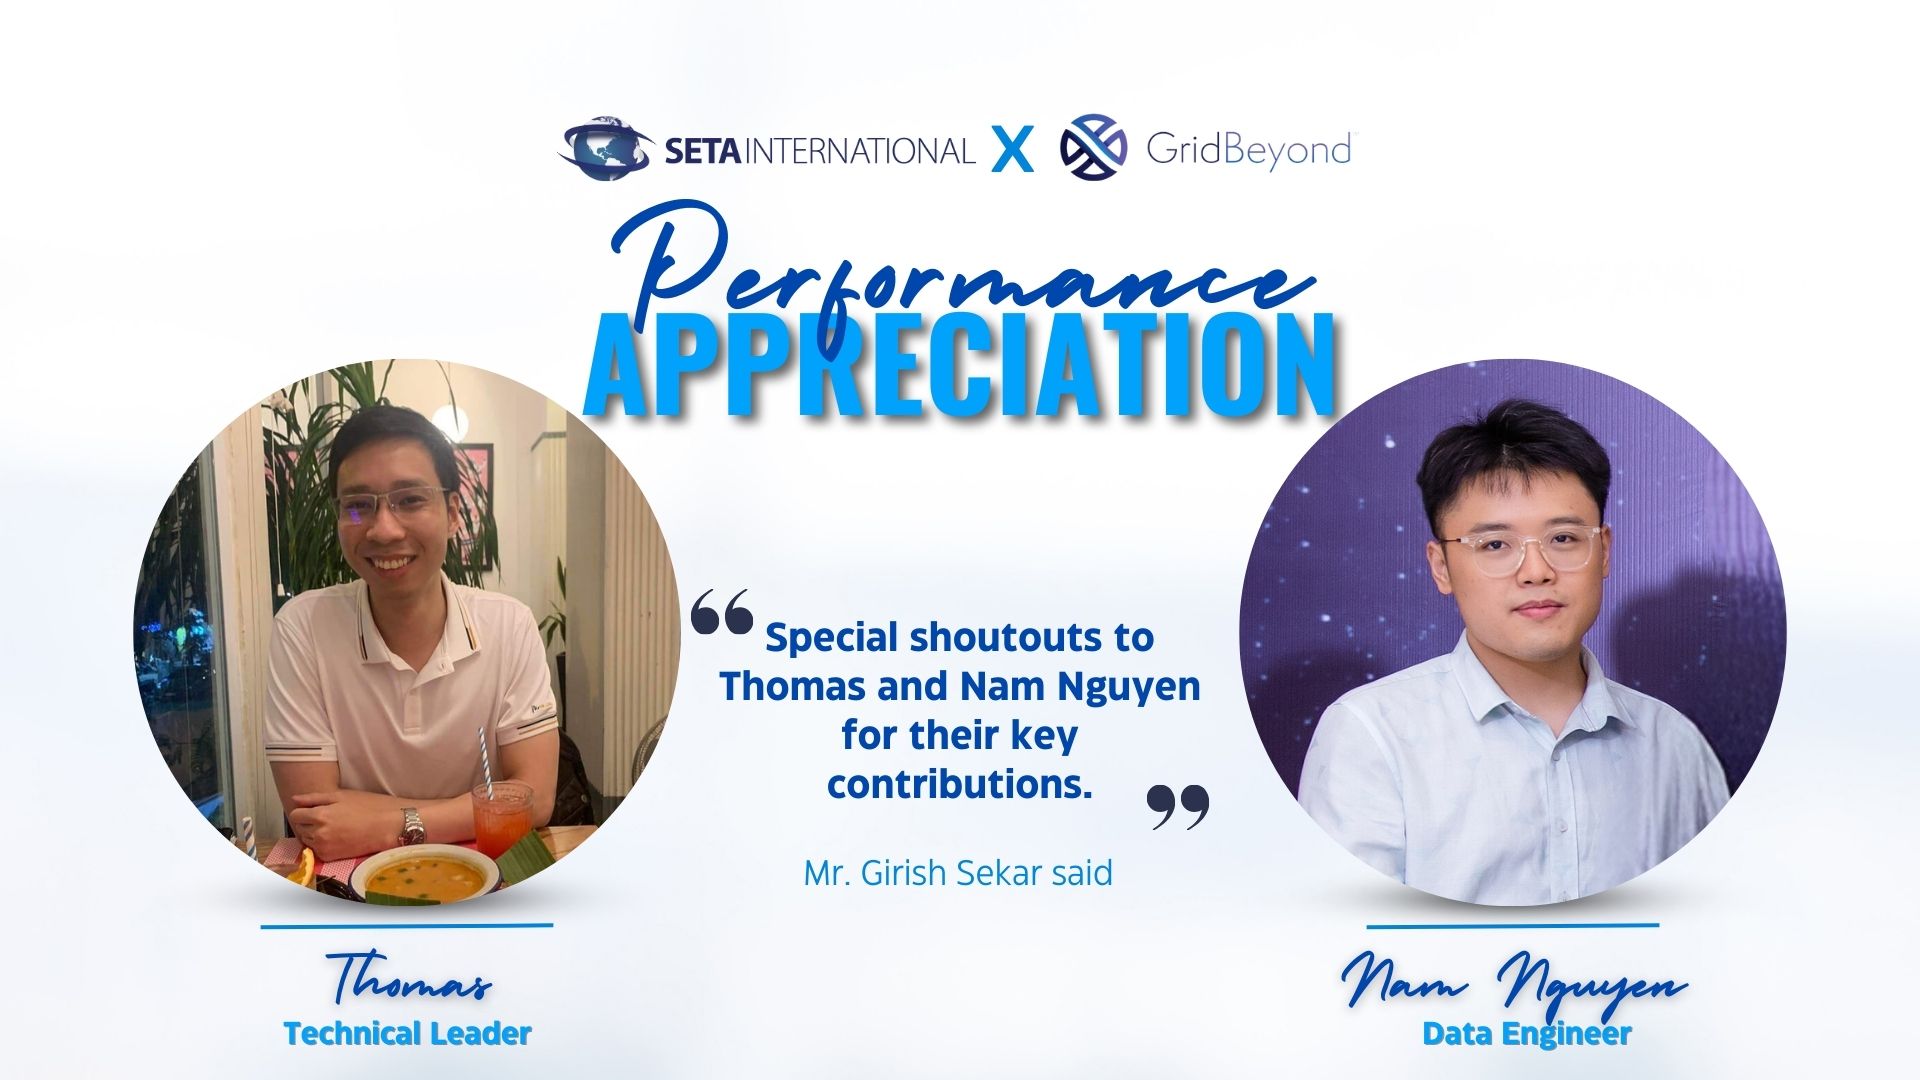 Thomas and Nam Nguyen have gained client’s trust